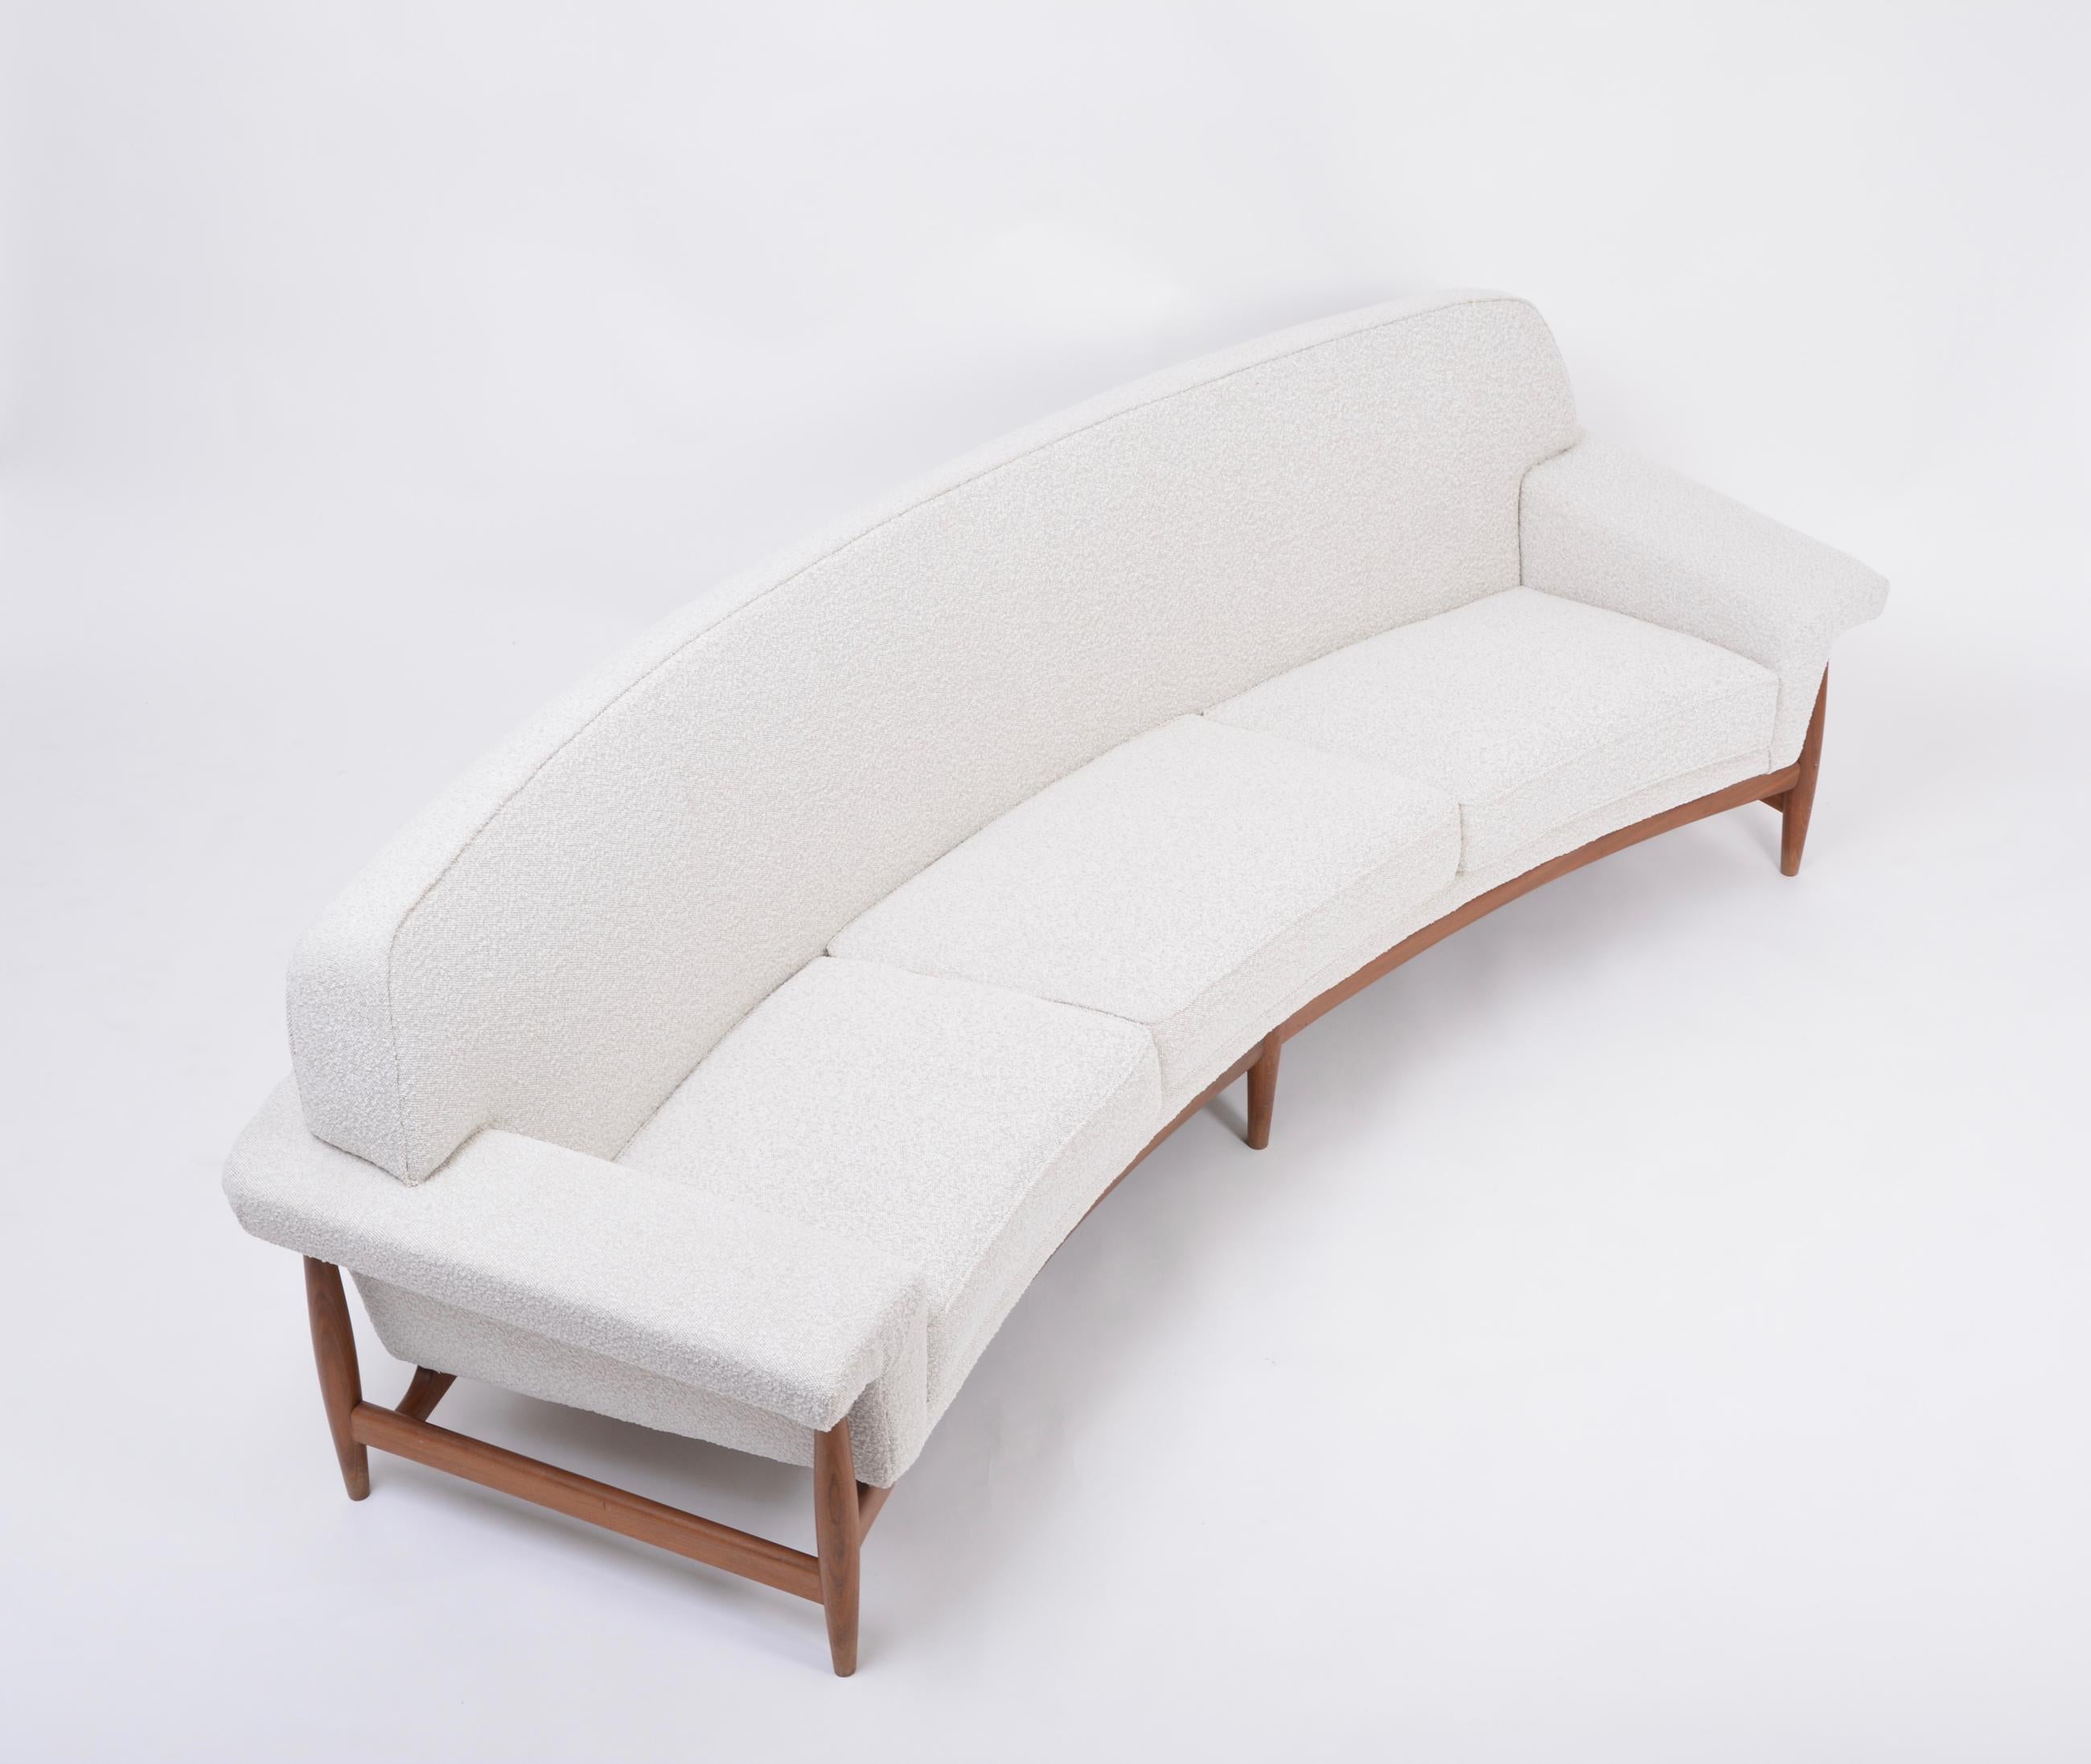 20th Century Large White Reupholstered Mid-Century Sofa by Johannes Andersen for Trensum